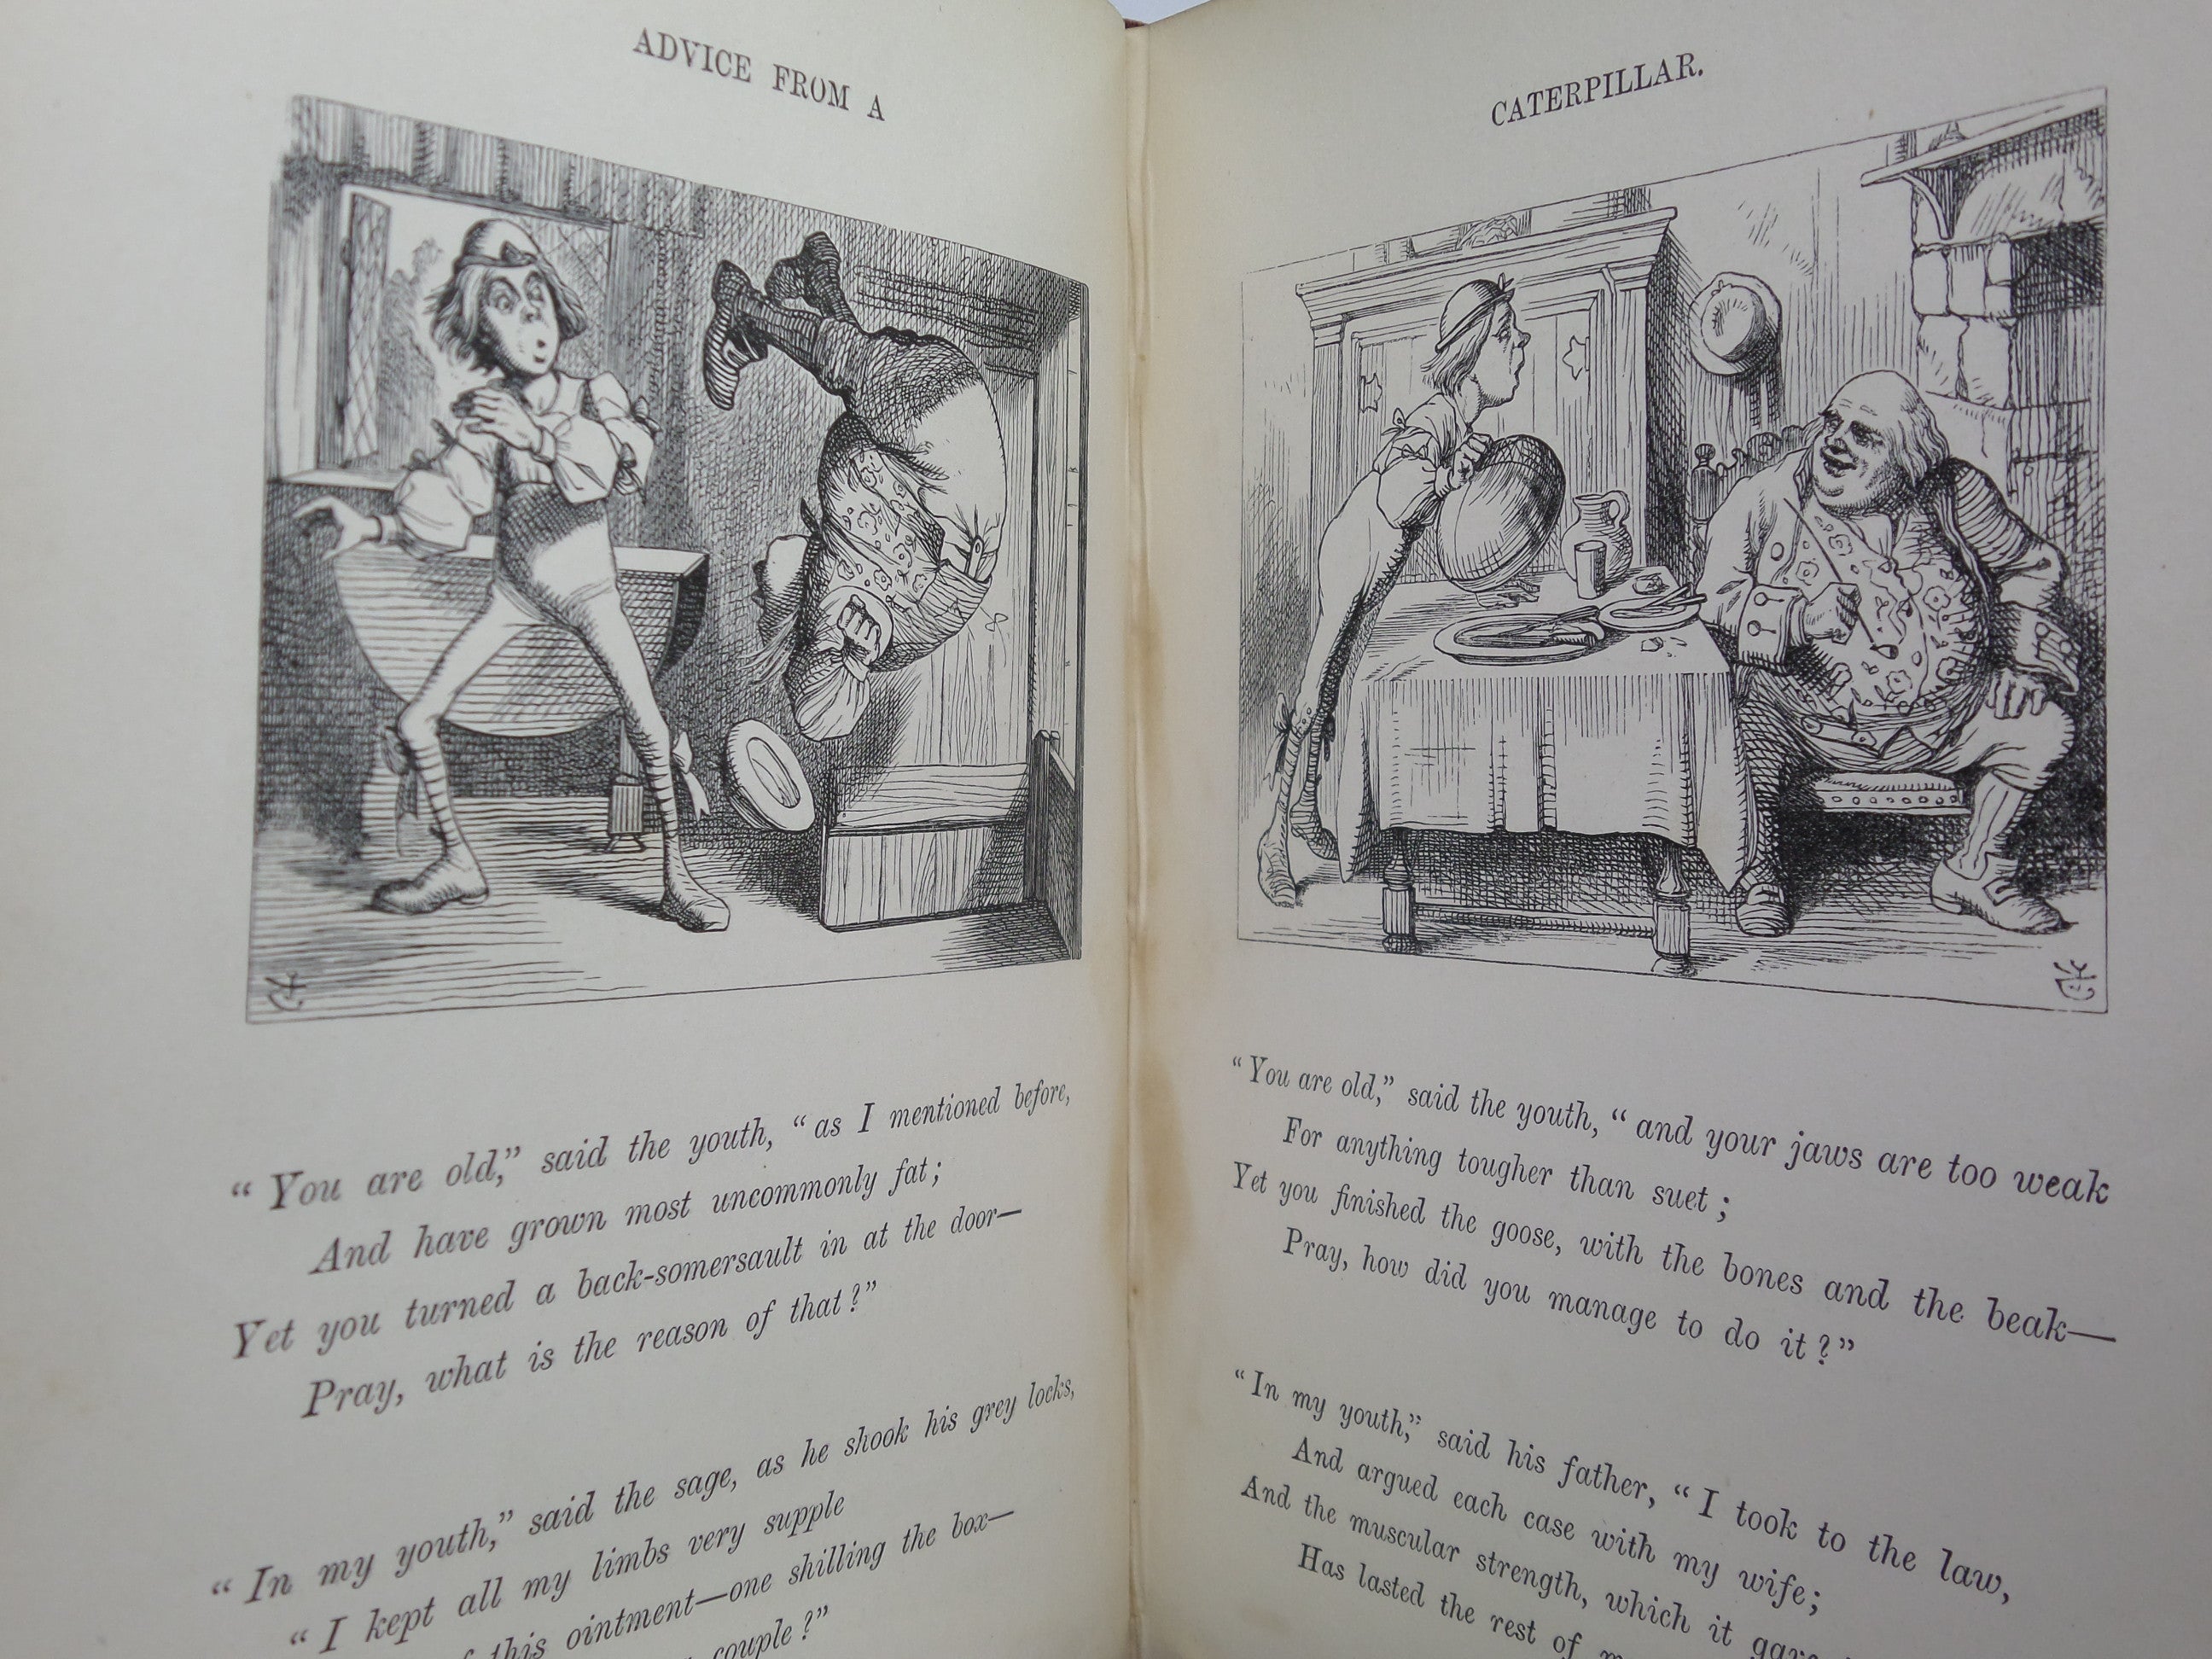 ALICE'S ADVENTURES IN WONDERLAND BY LEWIS CARROLL 1868 FIFTH EDITION